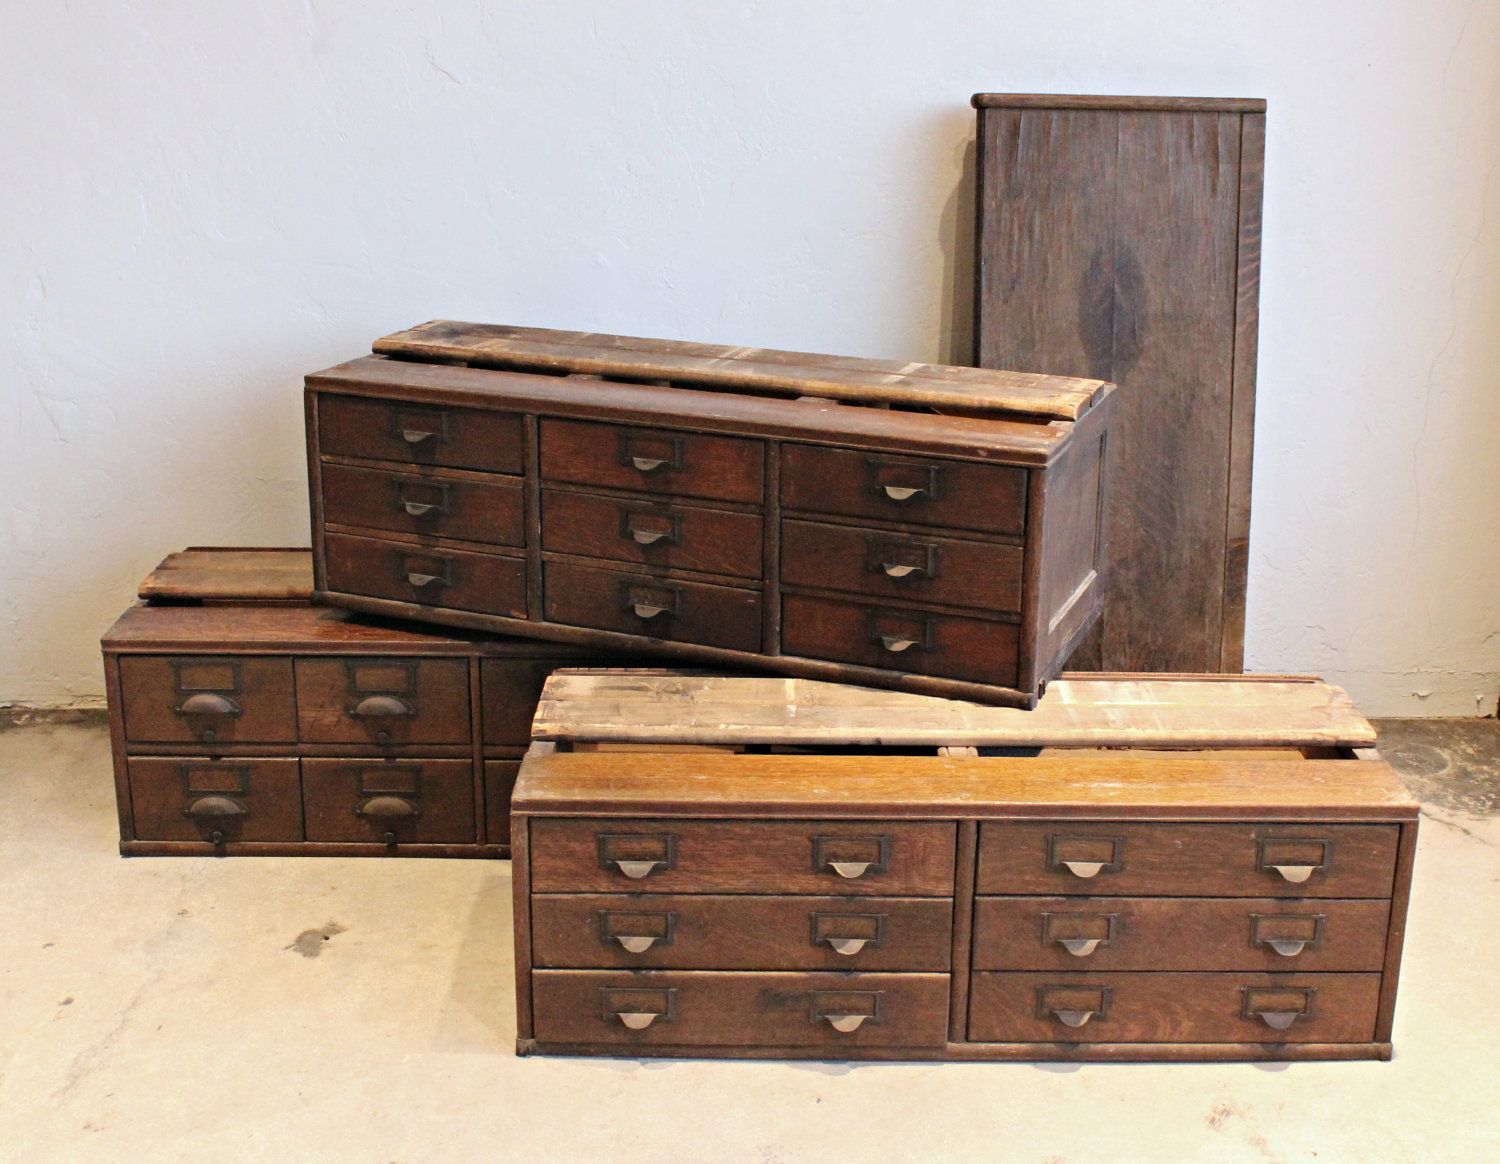 Antique Wooden 23 Drawer Storage Cabinet | Wood Storage Cabinets Intended For Wood Cabinet With Drawers (View 14 of 20)